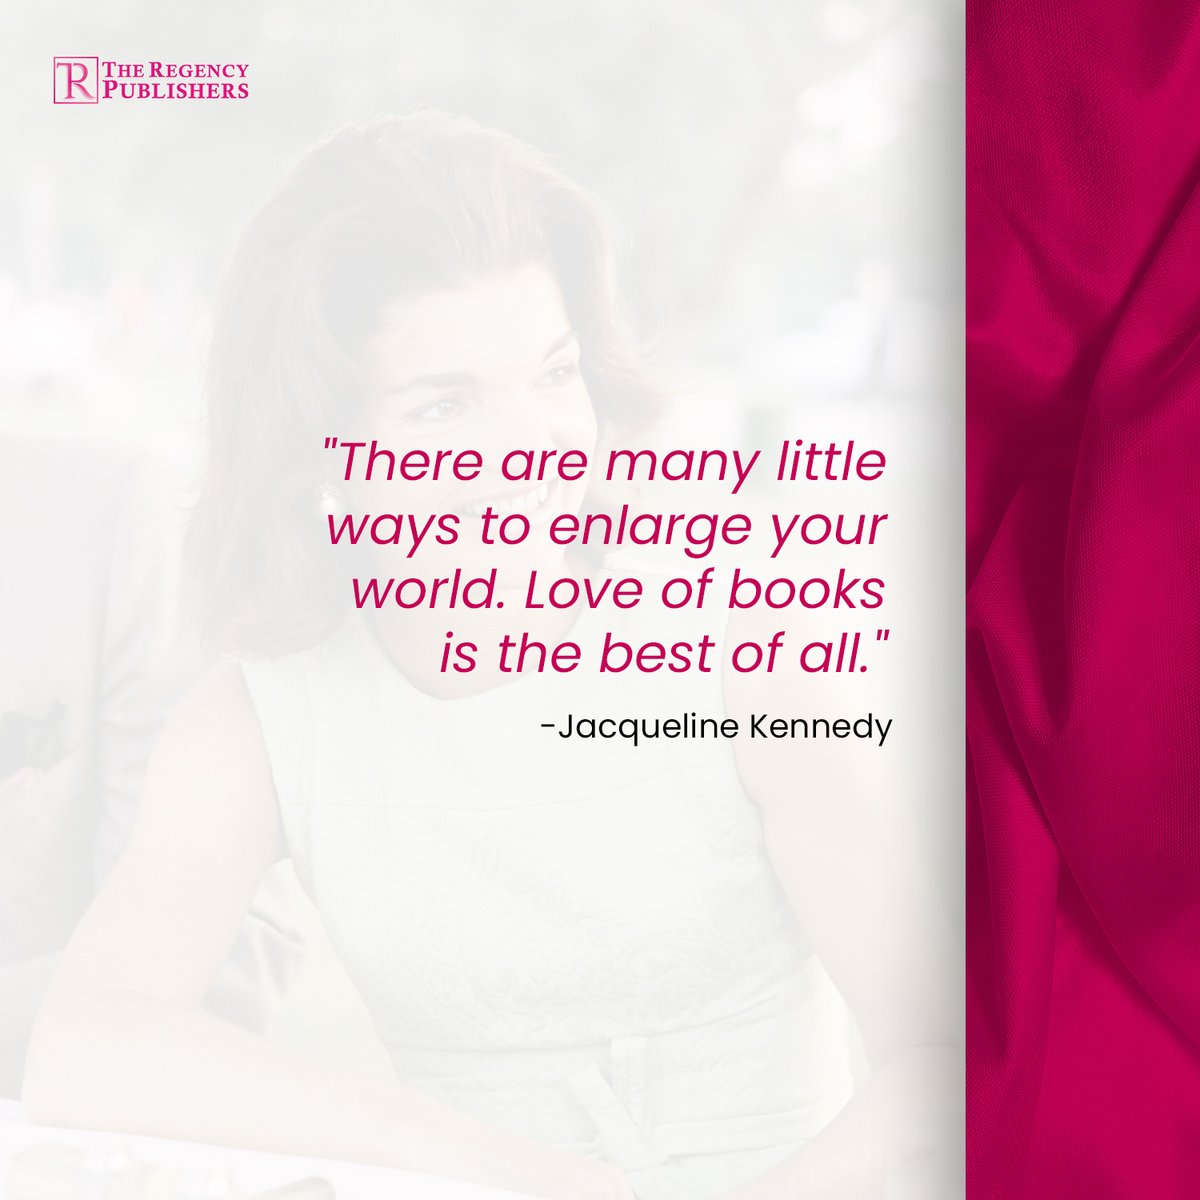 Indeed, one of the best ways to appreciate and experience even the impossible in this world is through books.

#TheRegencyPublisher #JacquelineKennedy #writer #books #booklovers #illustrator #naturalscientist #conservationist